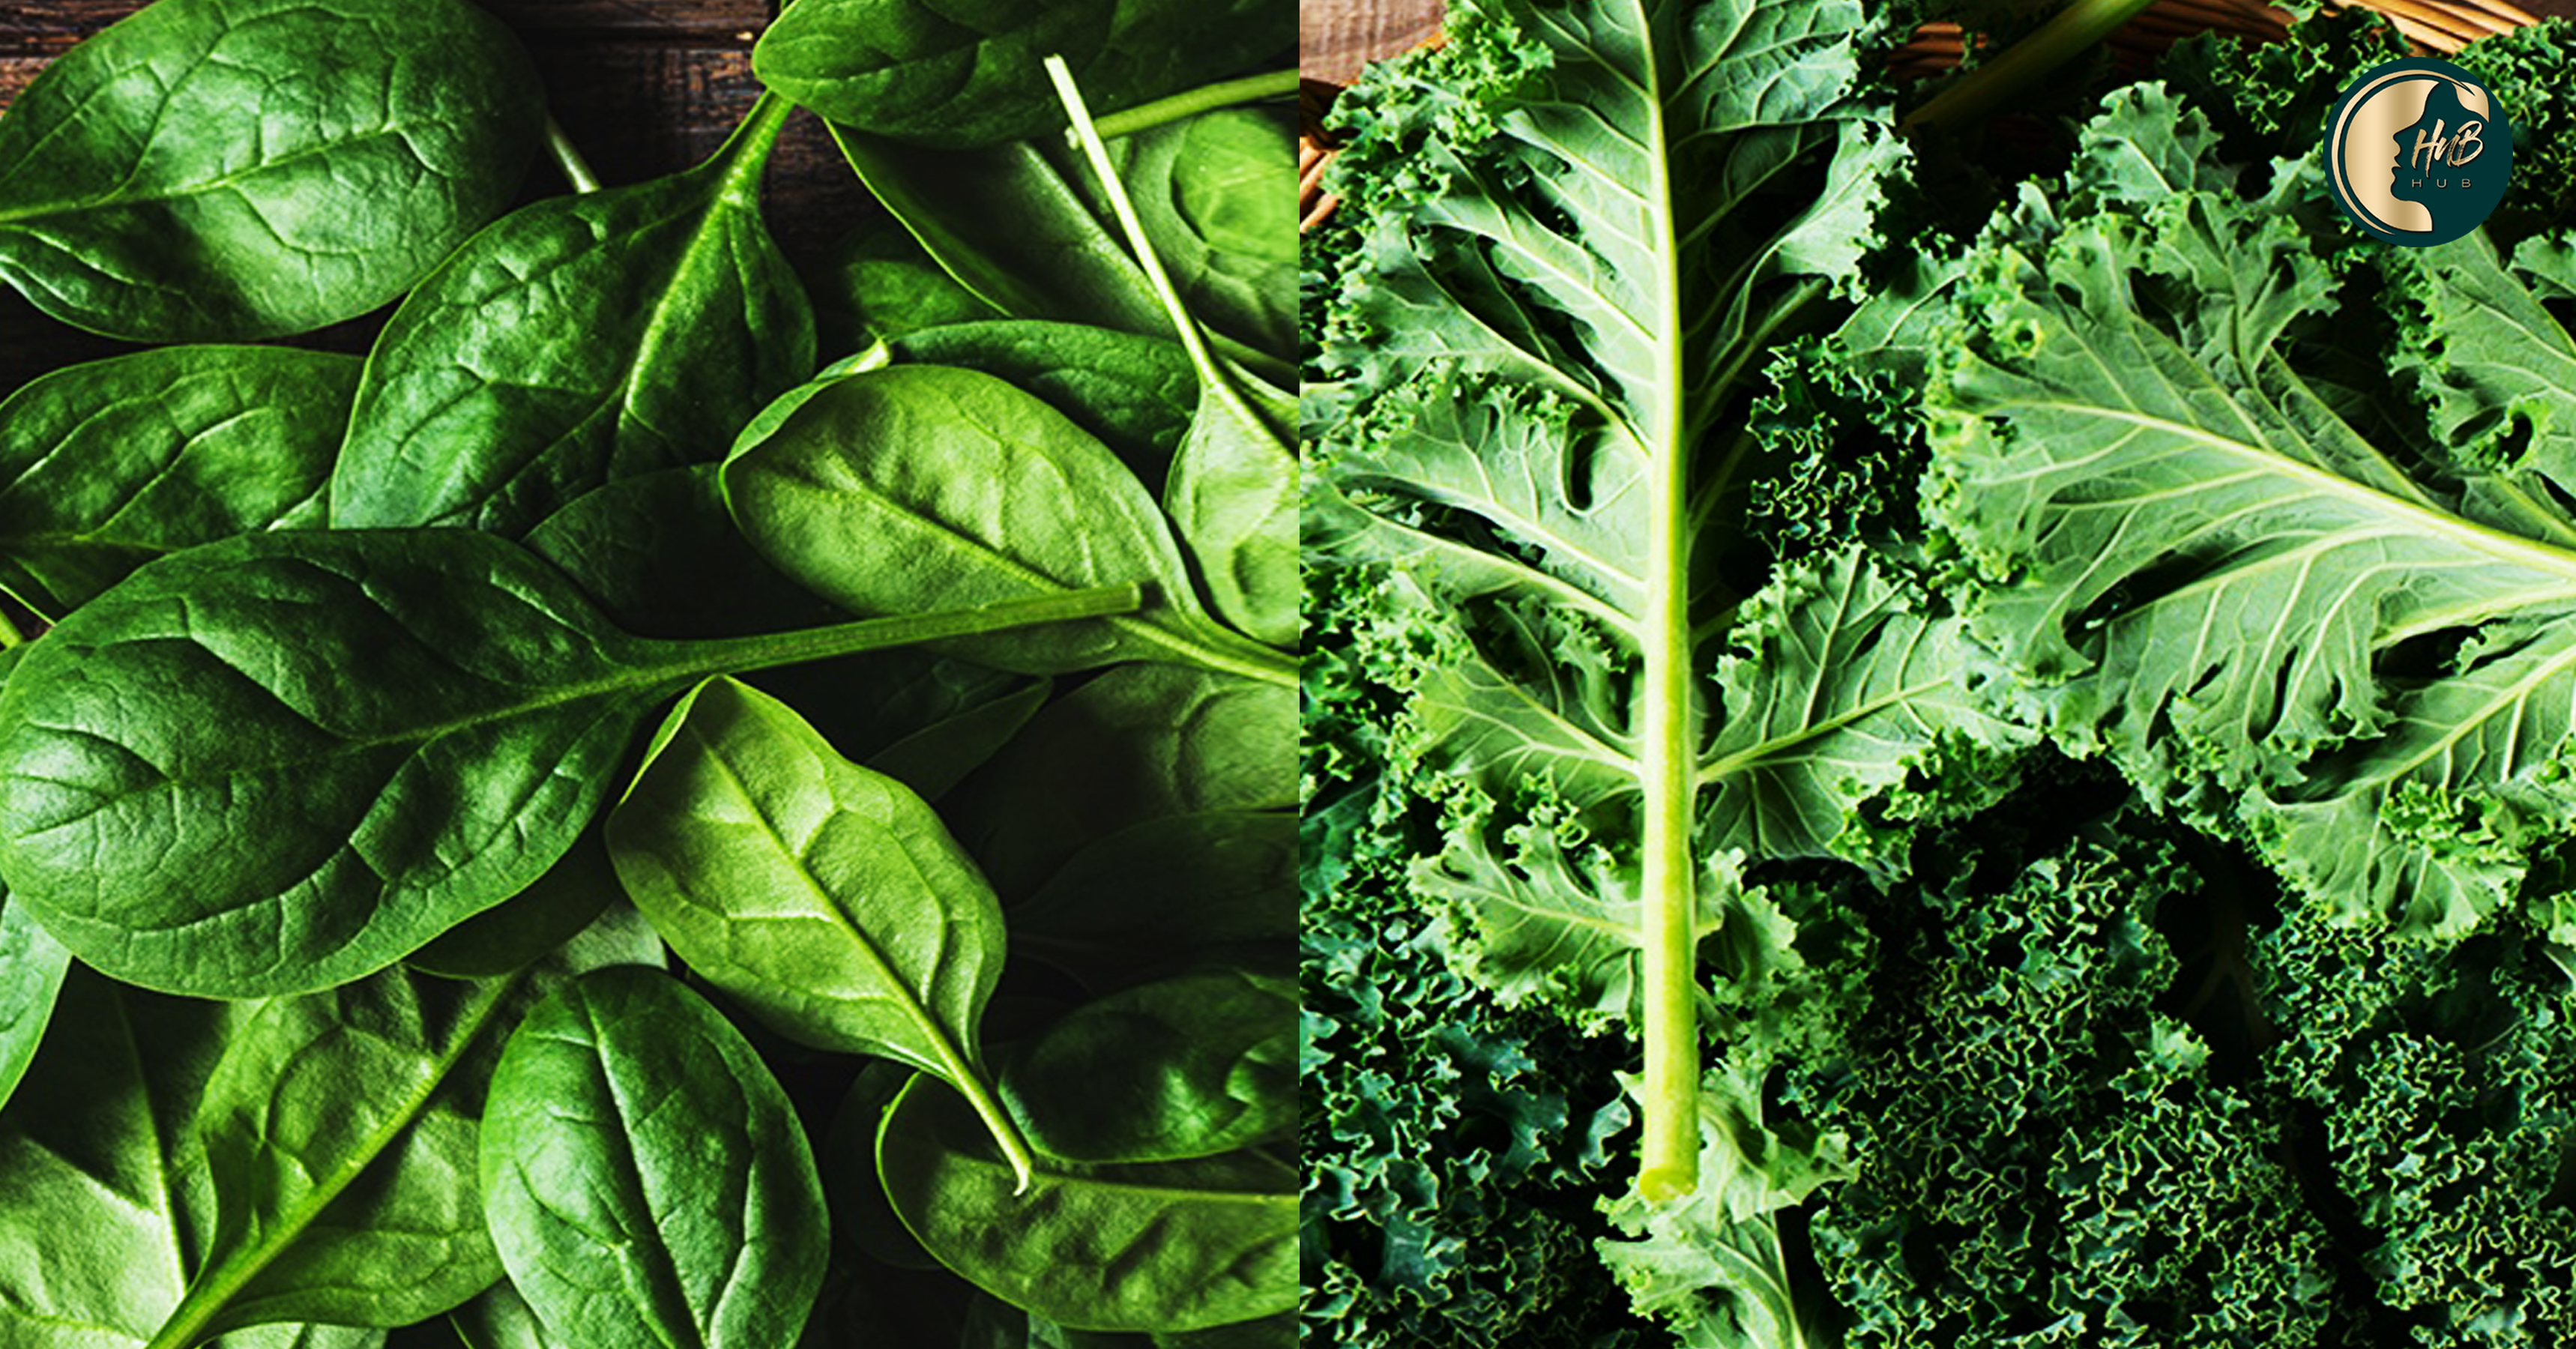 Leafy Greens like spinach and kale for new Growing and Strong Hair! Health n Beauty HuB